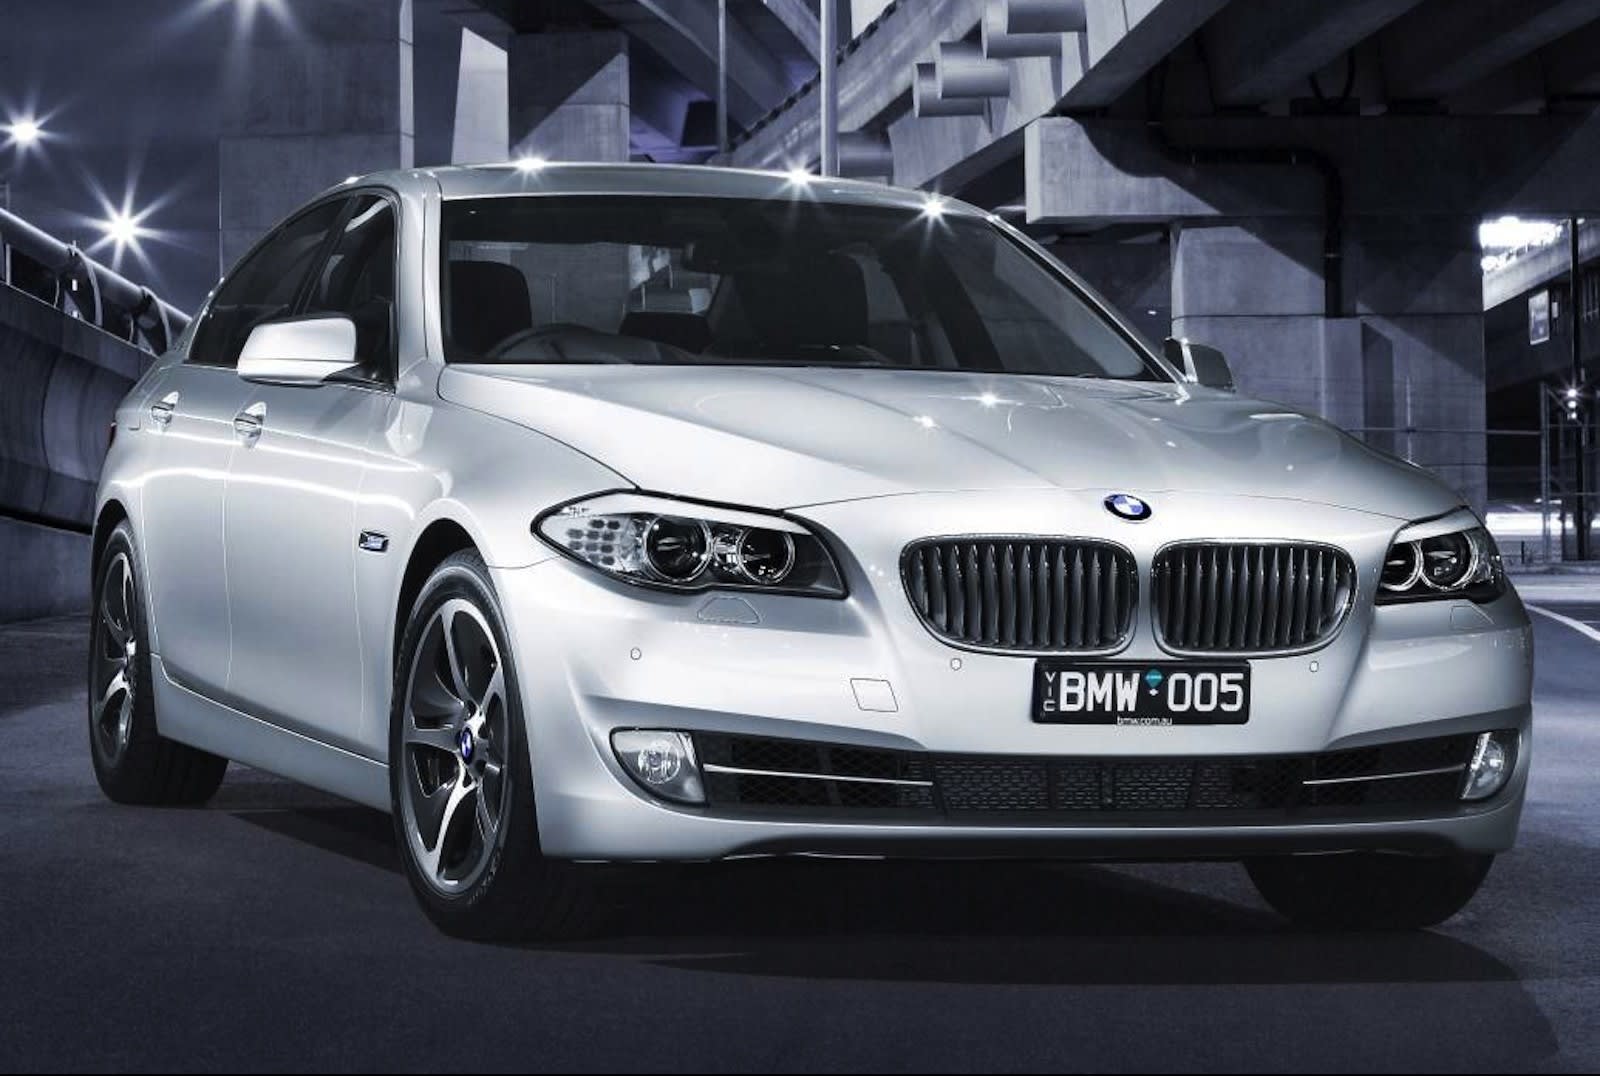 BMW ActiveHybrid 5 here in October; two more hybrids on the way - Drive